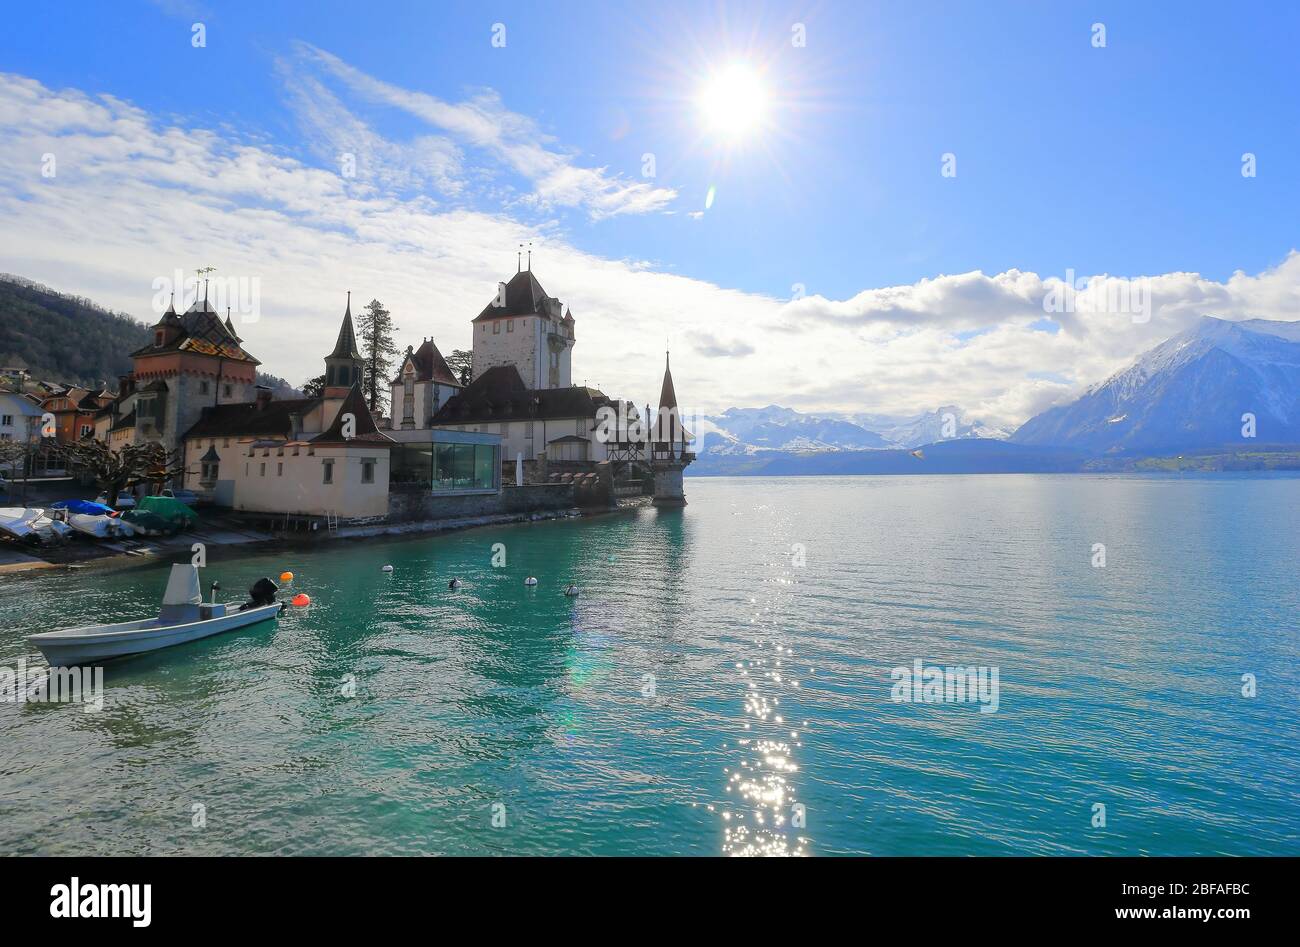 Oberhofen Castle from Lake Thun. Oberhofen town is located on the northern shore of Lake Thun. Switzerland, Europe. Stock Photo